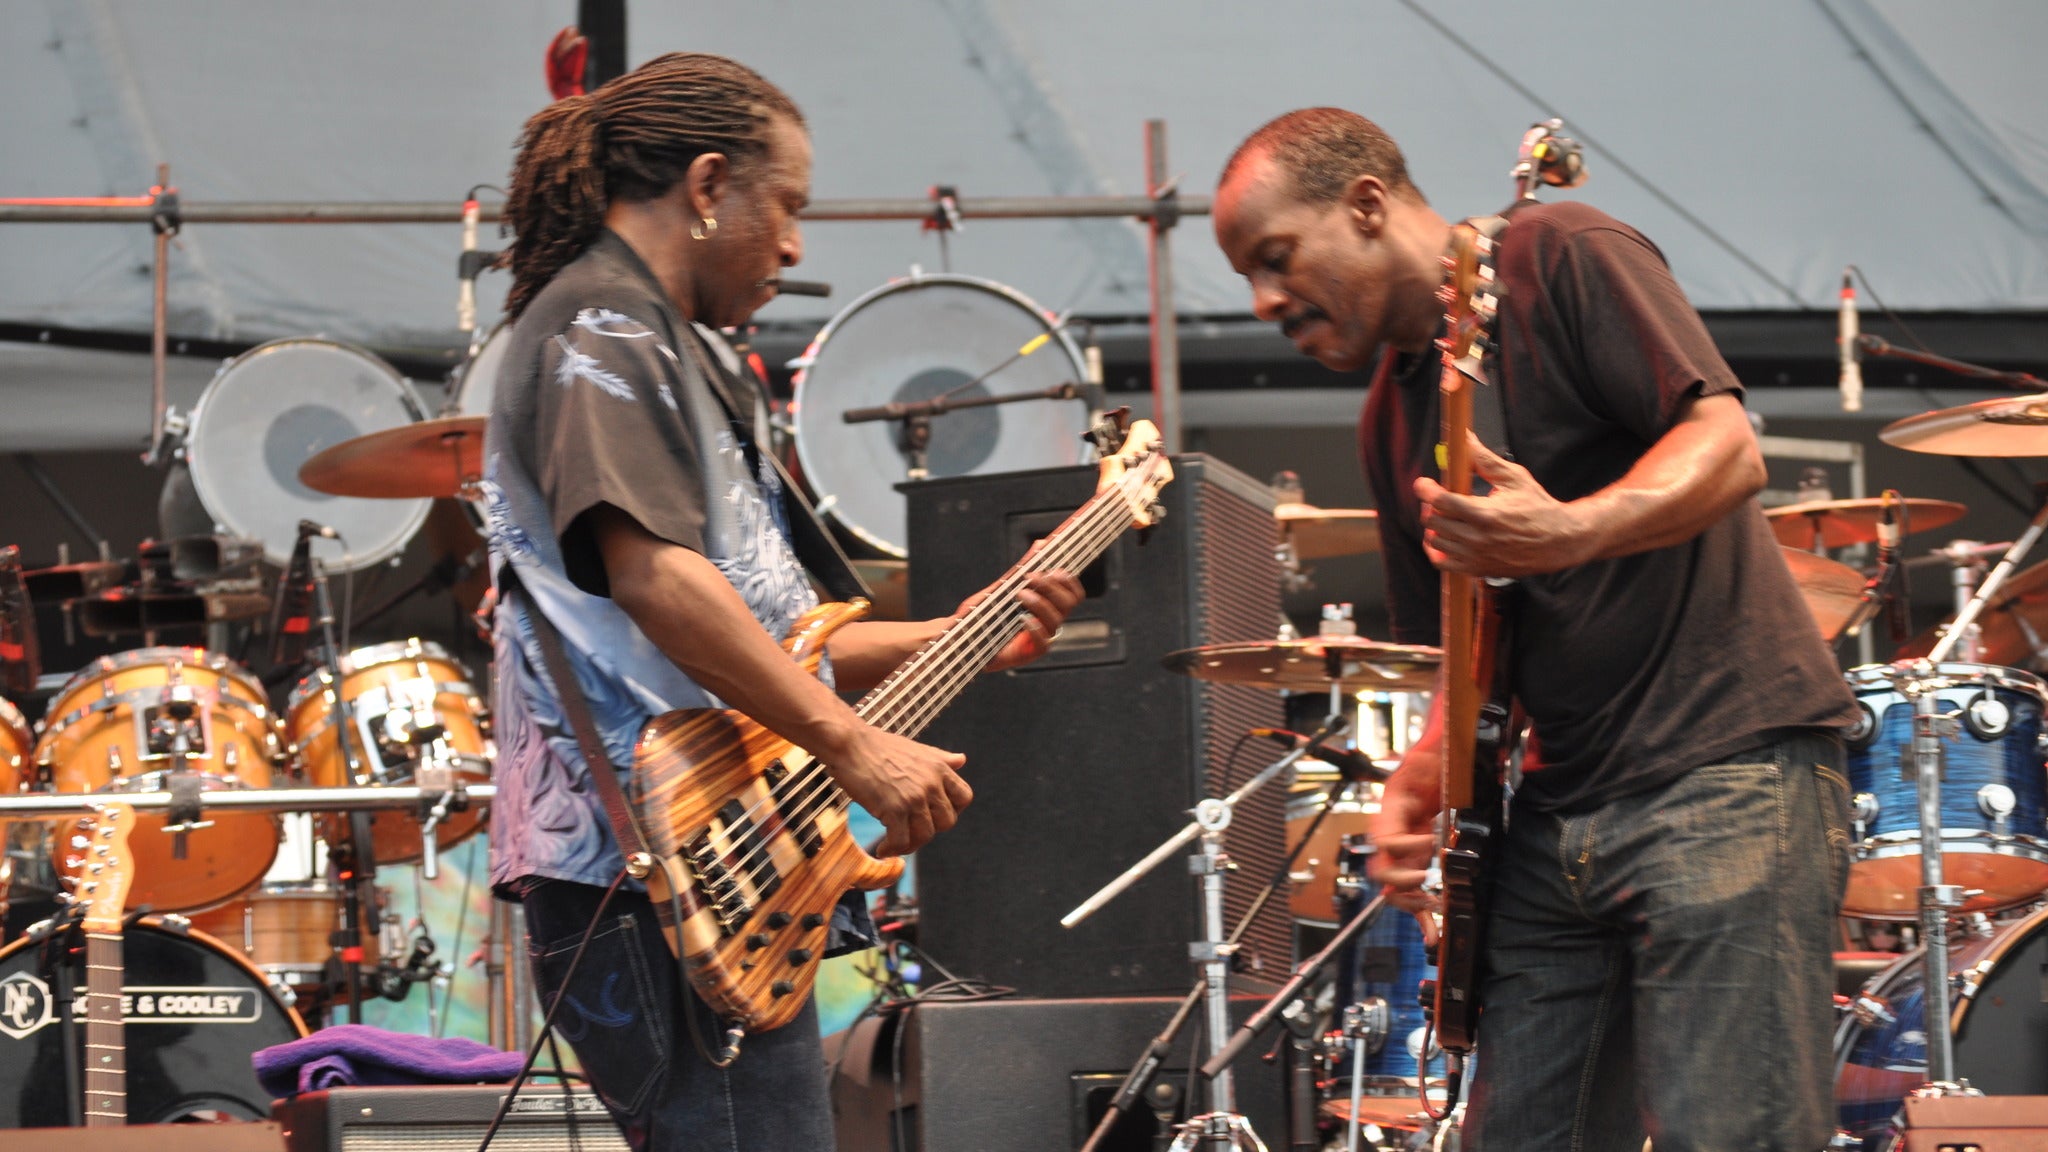 Image used with permission from Ticketmaster | Dumpstaphunk tickets